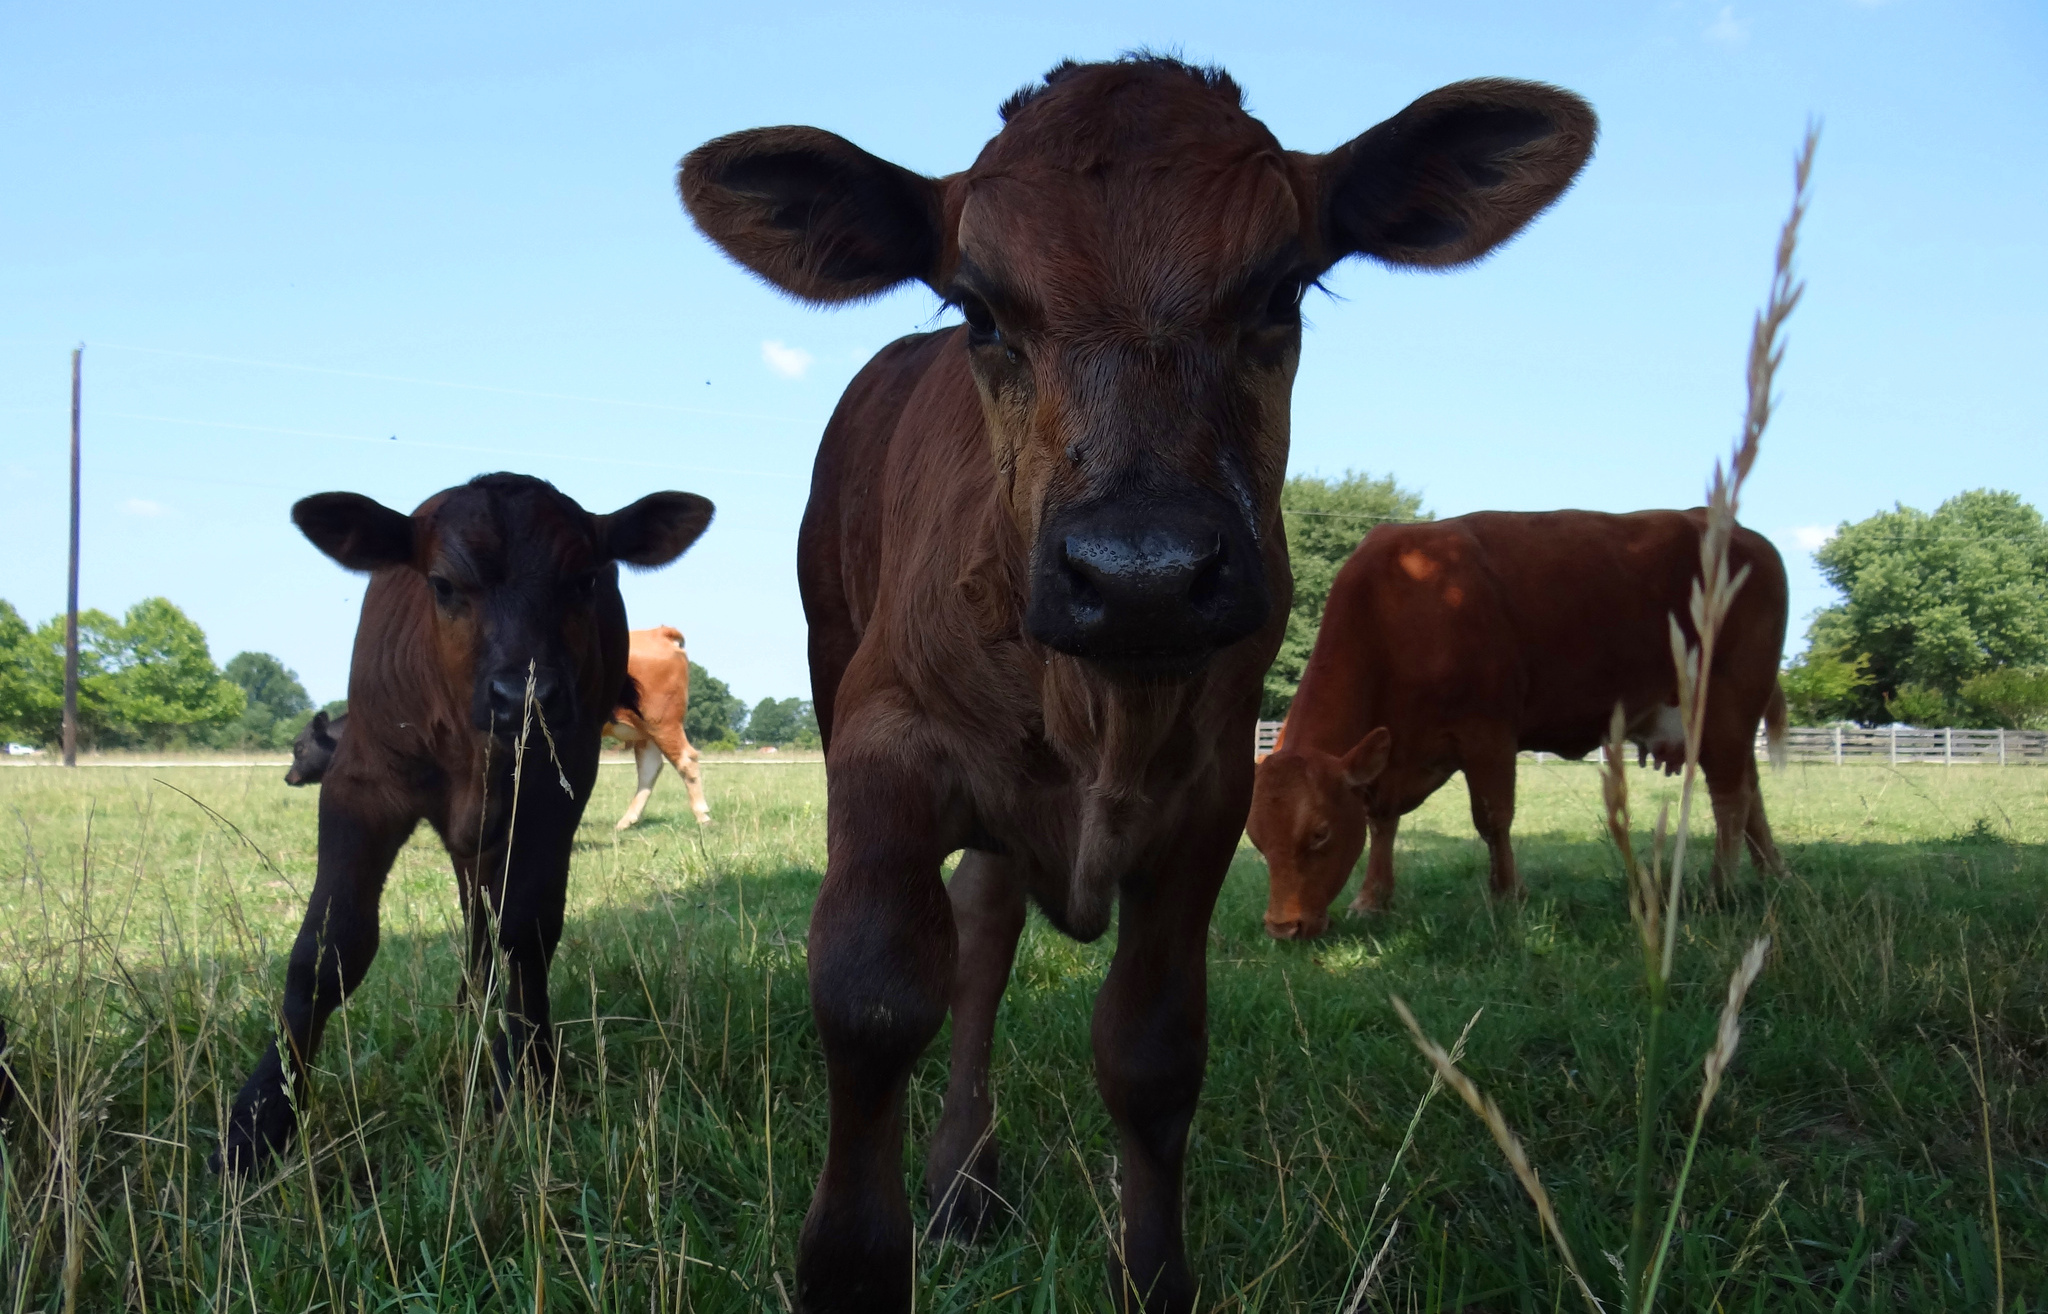 Animal Welfare Organizations Adopt a Plant-Based Policy to Spread Compassion for All Animals